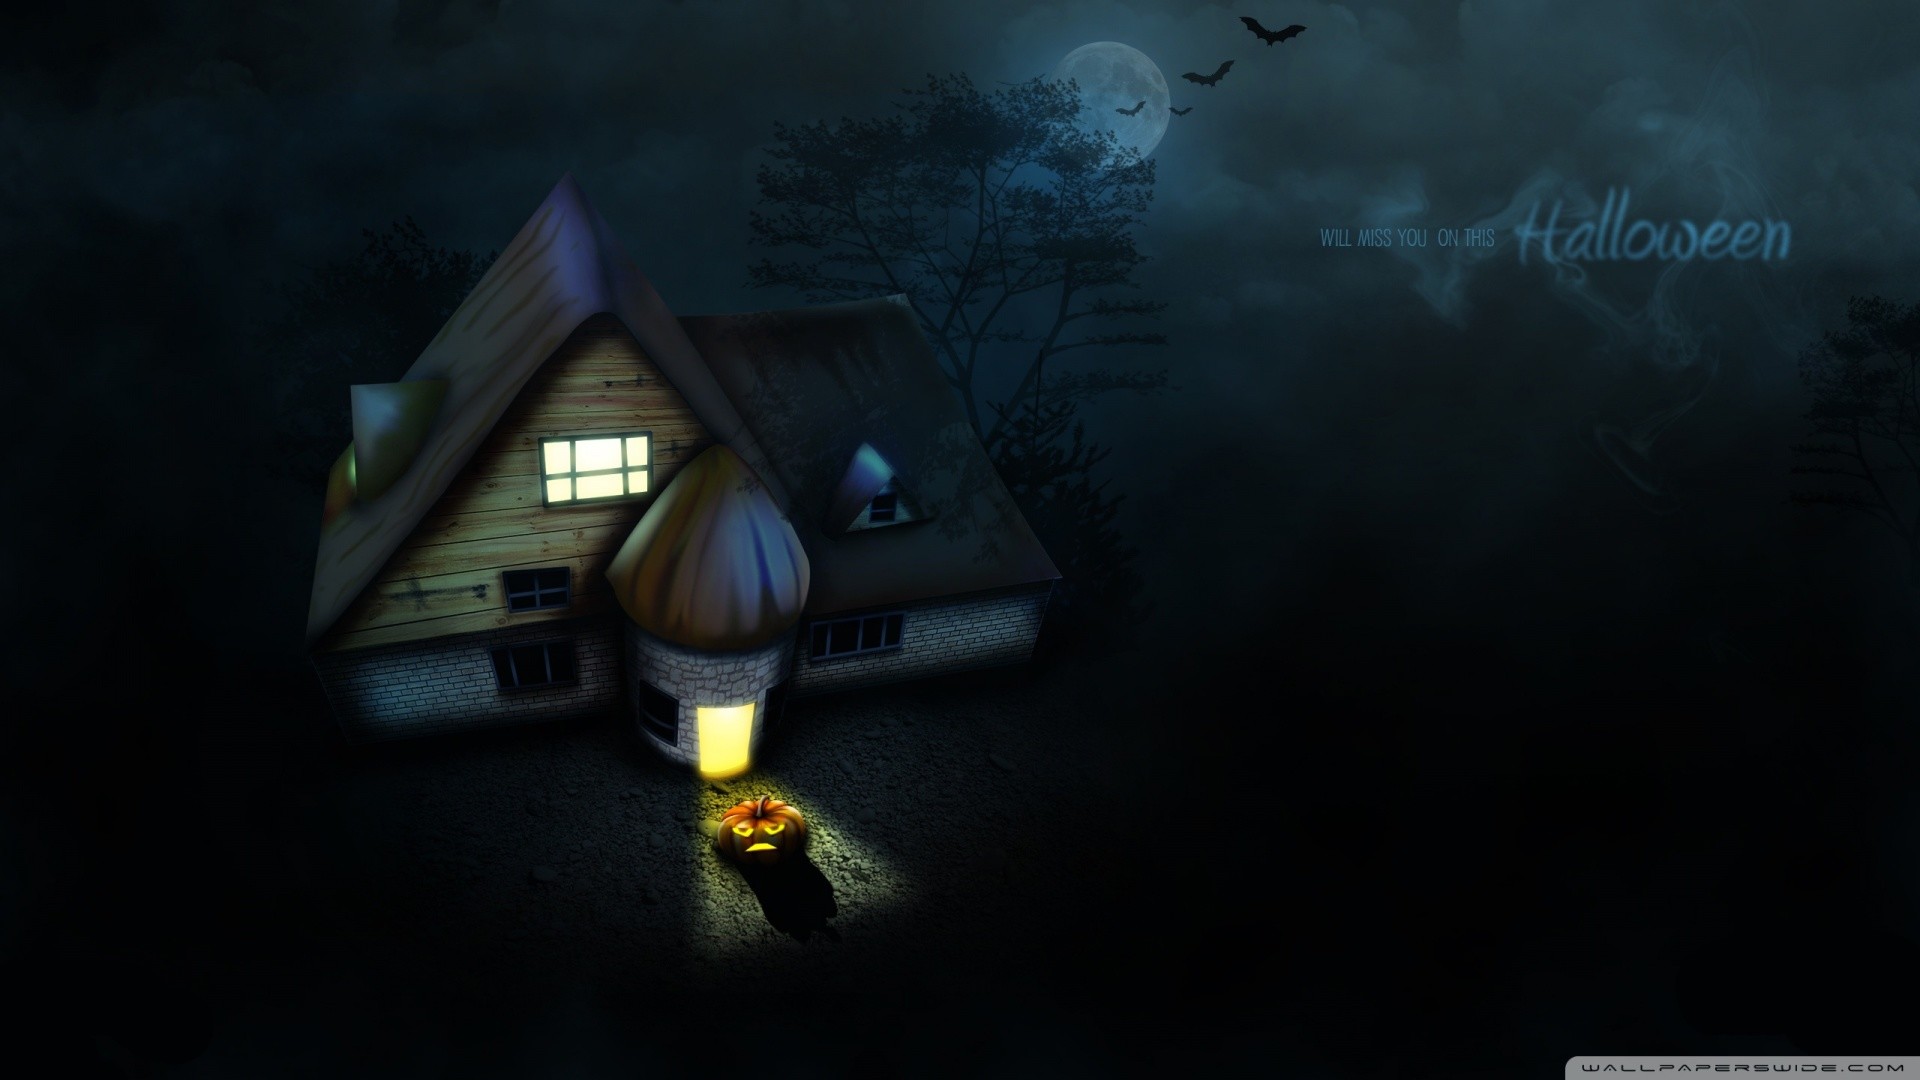 1920x1080 Stunning HD Wallpapers For Your Desktop #56: Happy Halloween Edition!